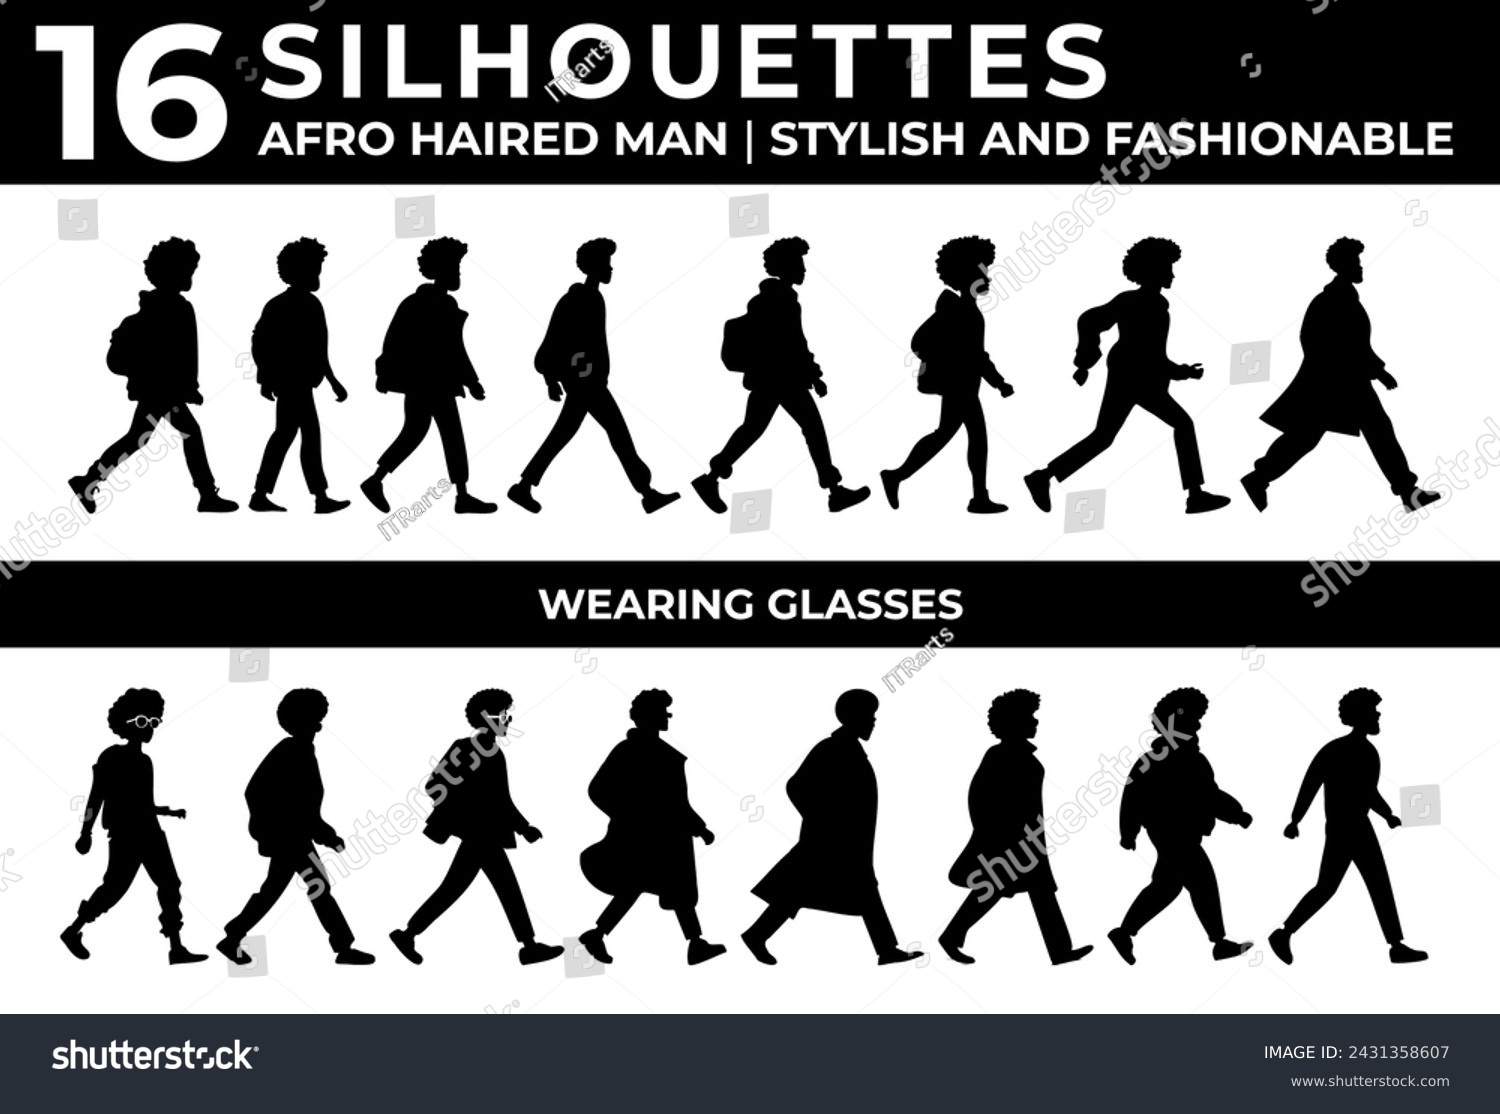 SVG of afro haired man silhouettes set, stylish and fashionable svg